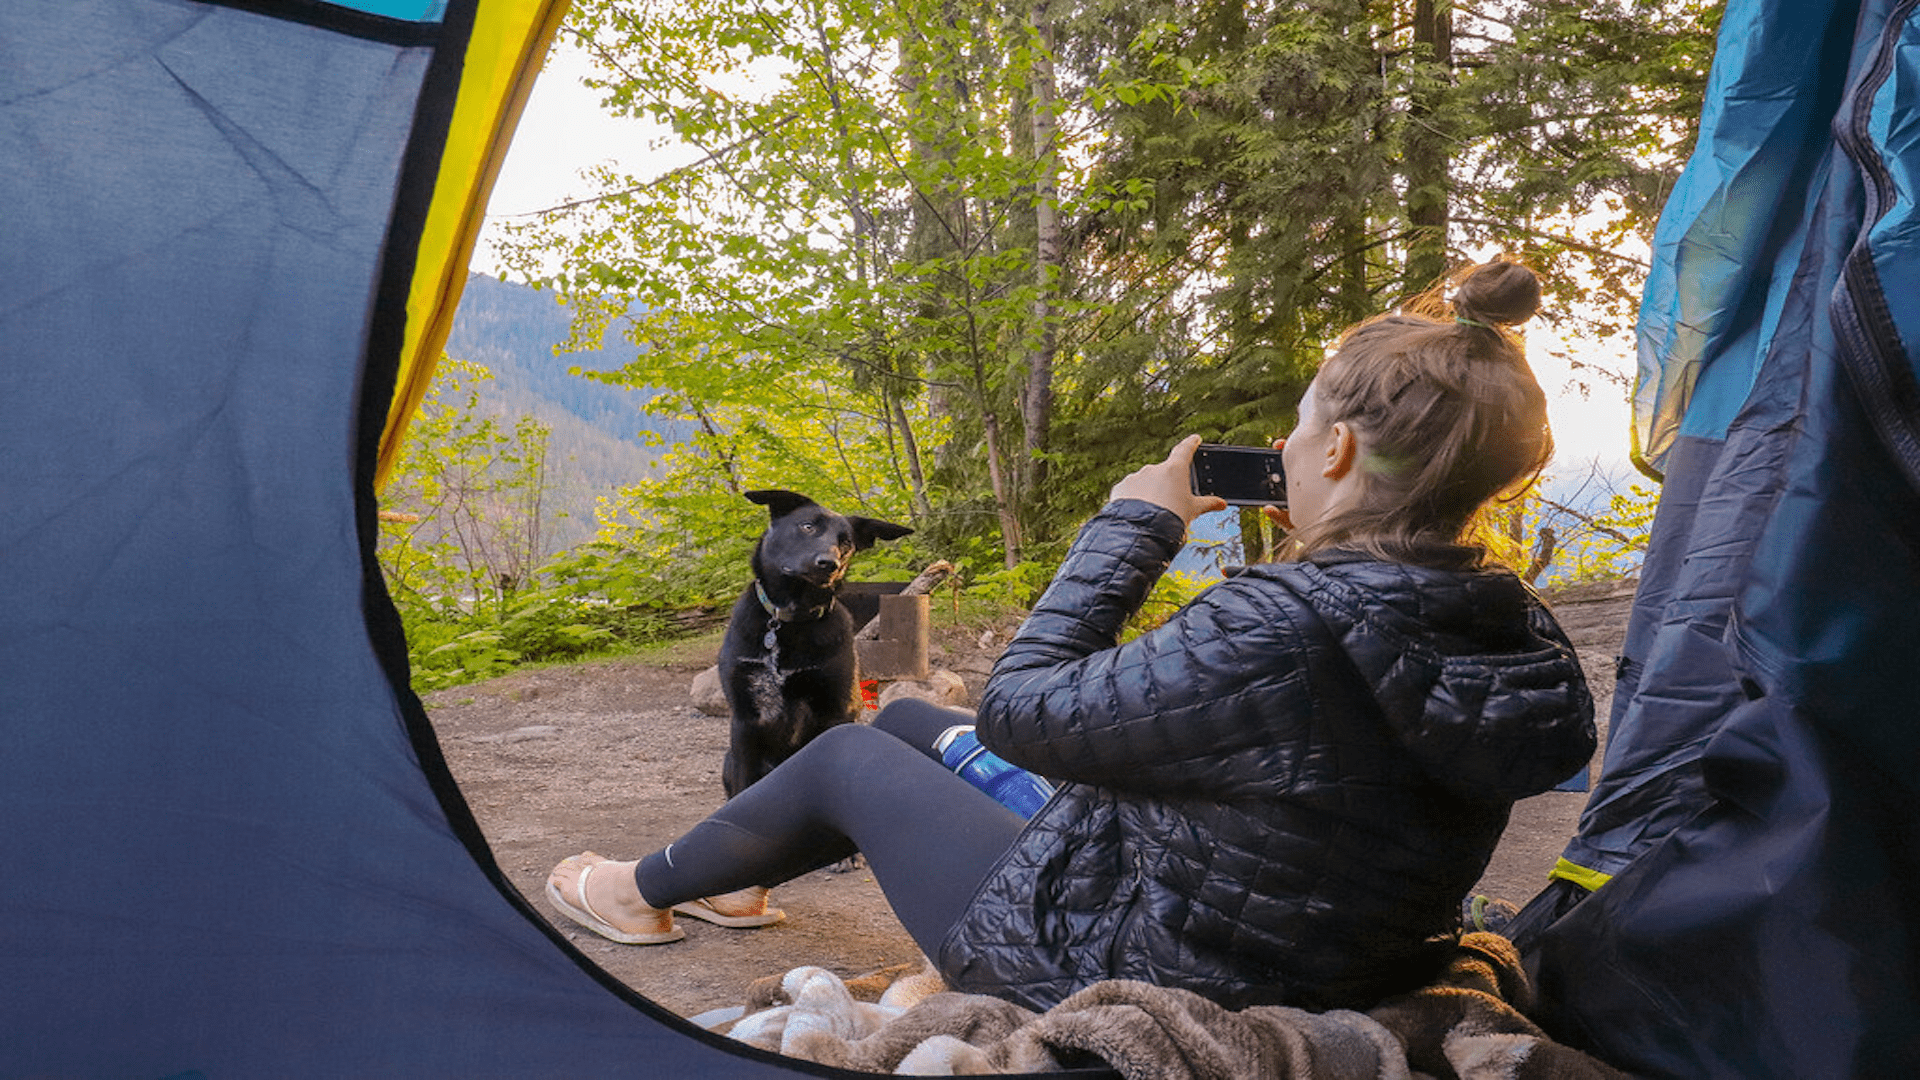 Woman taking a photo while sitting in a tent